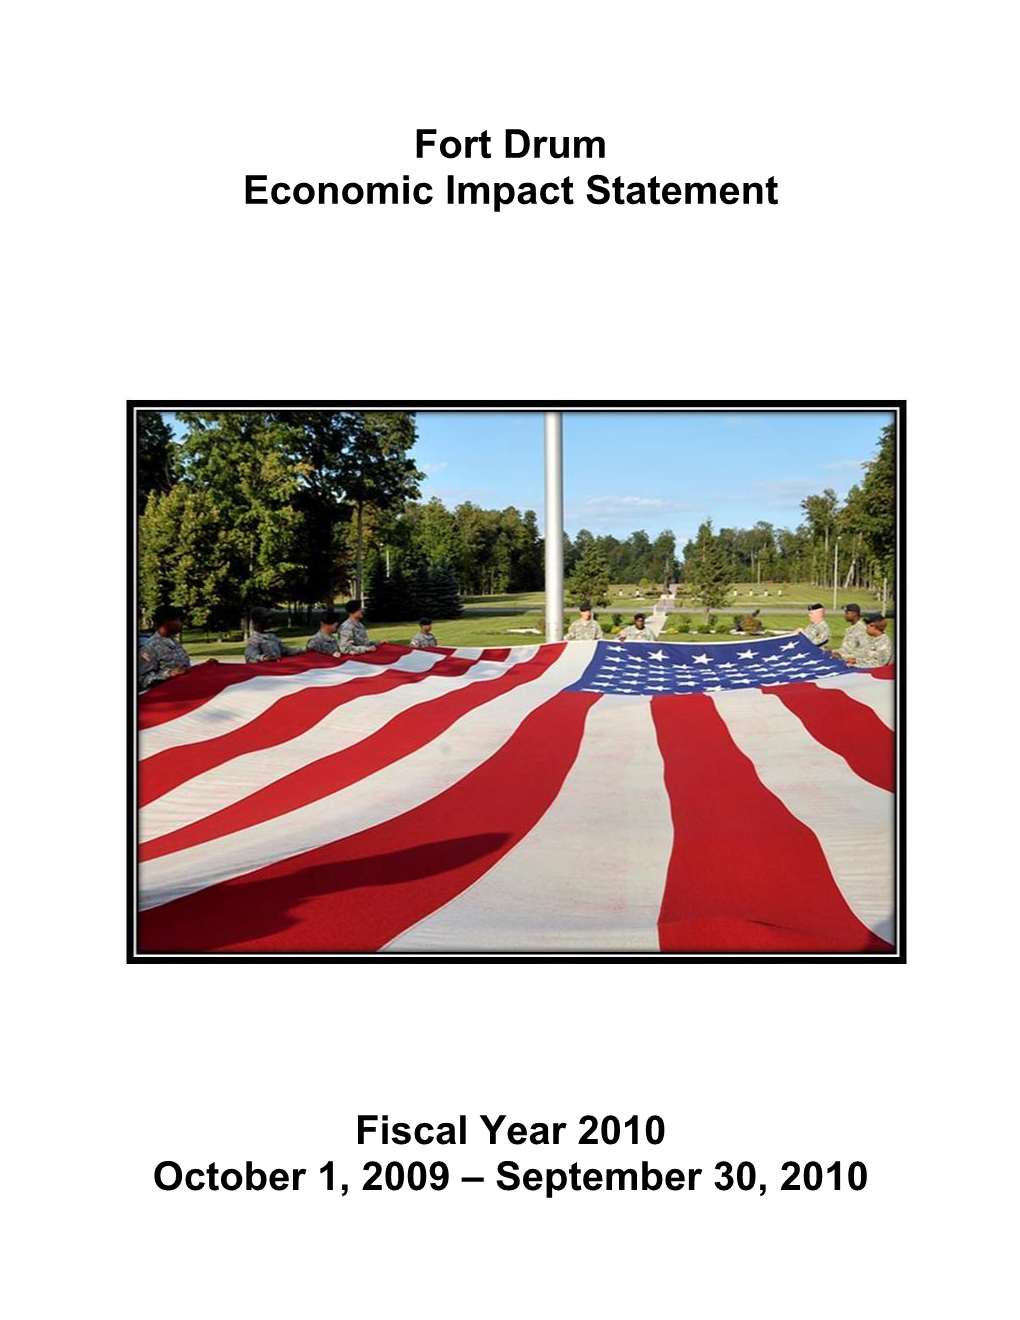 Fort Drum Economic Impact Statement Fiscal Year 2010 October 1, 2009